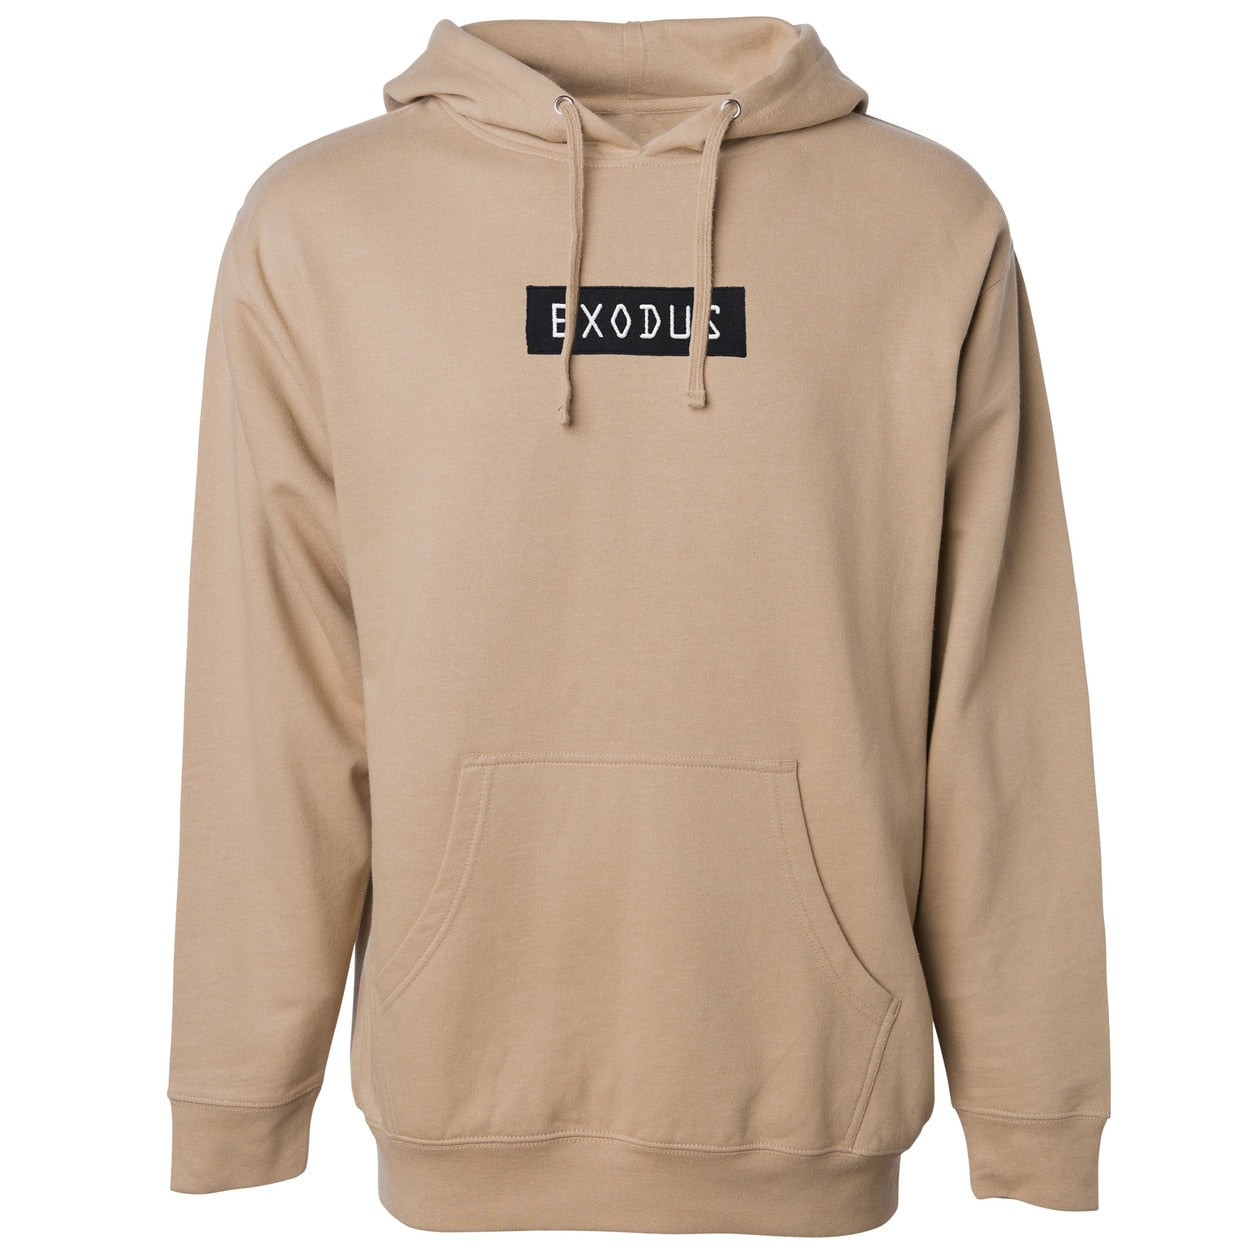 Exodus Optical Embroidered Pullover Hoodie - Sand